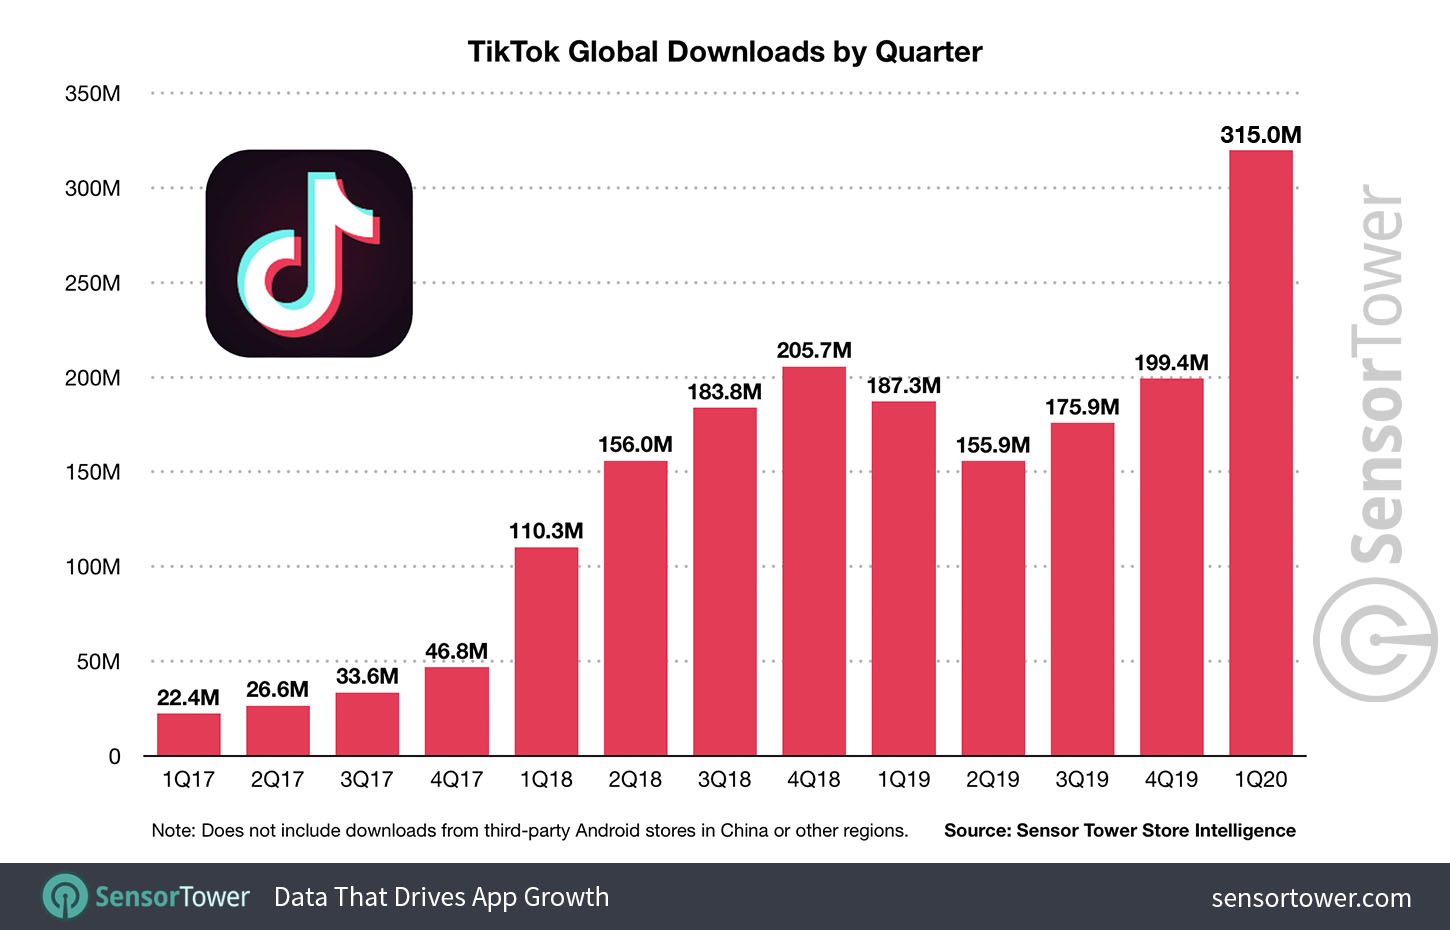 TikTok had a record-breaking 1Q20 this year